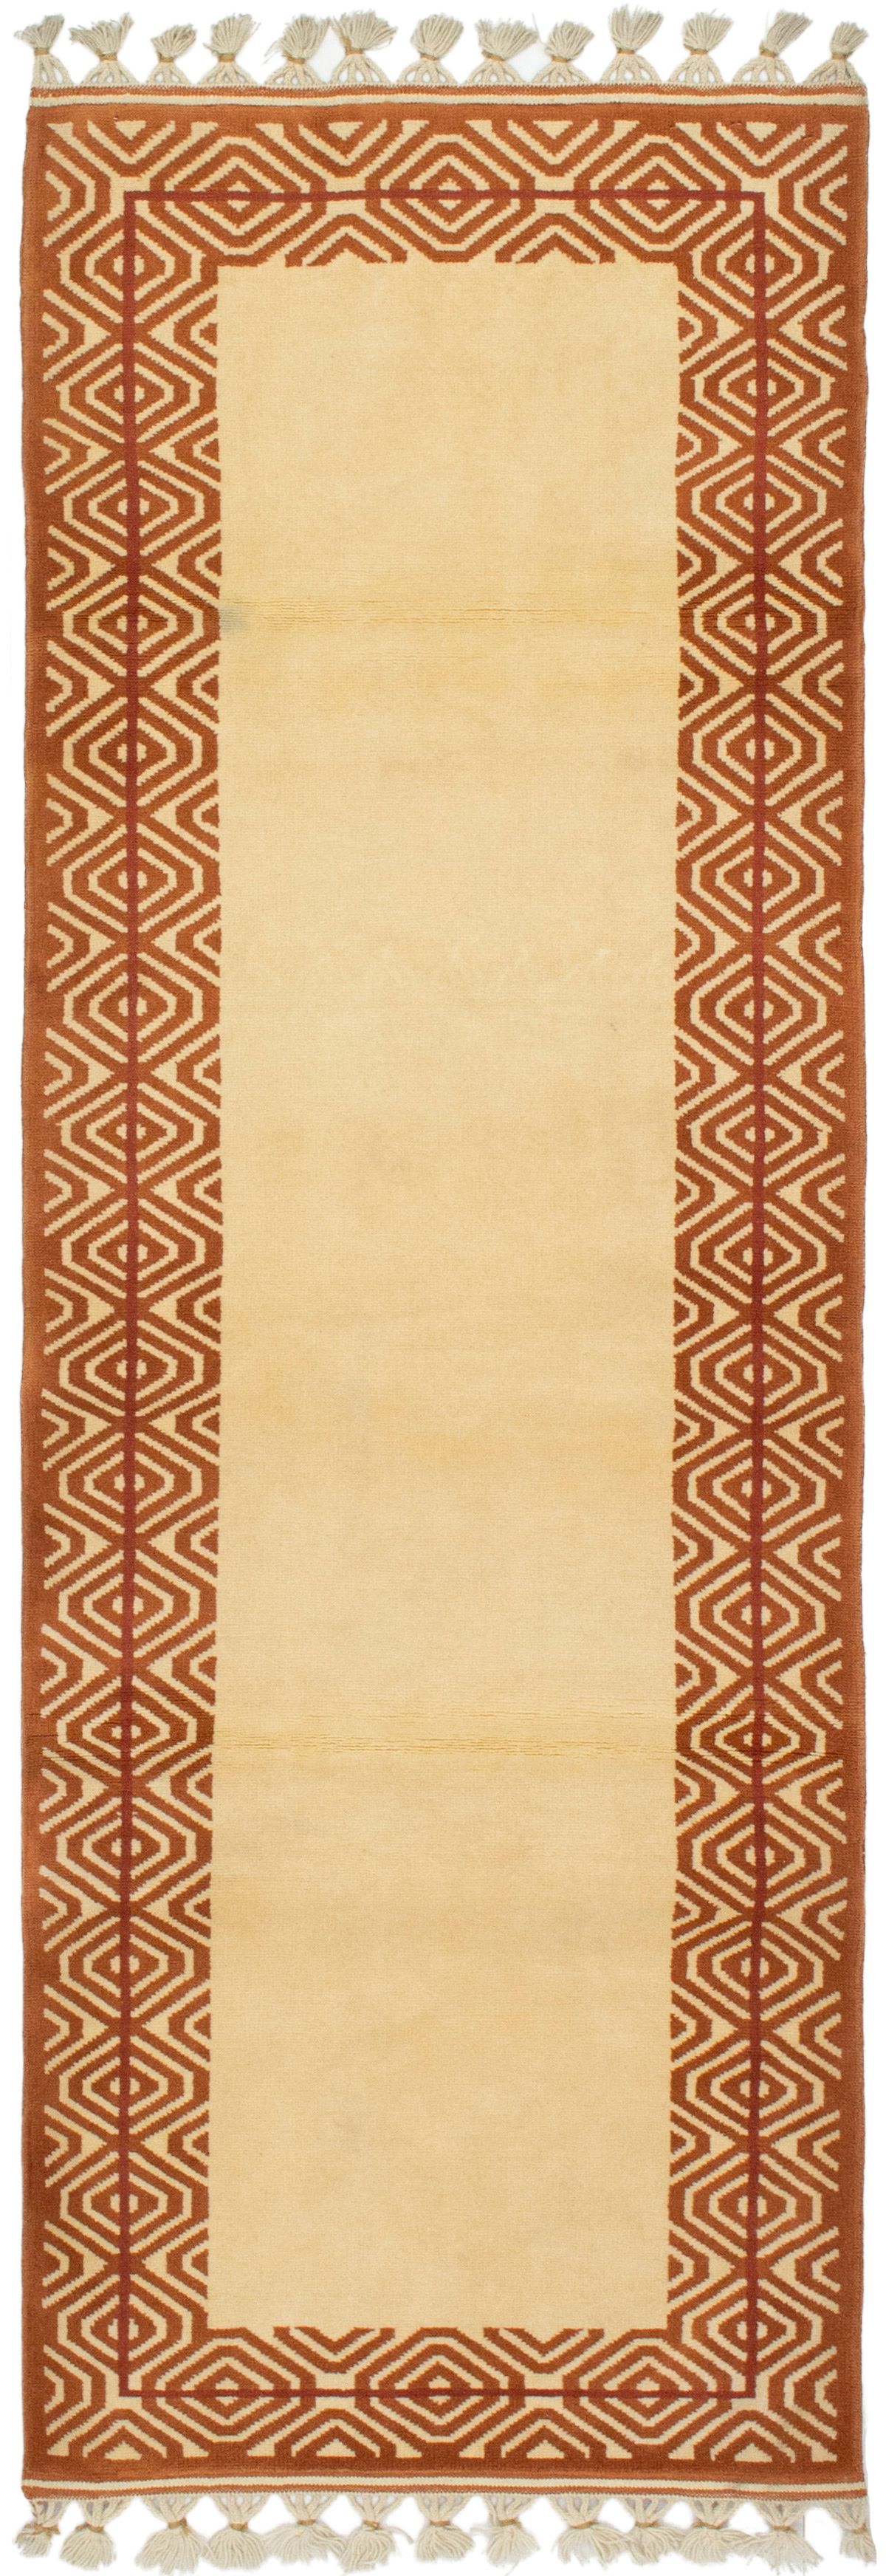 Hand-knotted Melis Vintage Cream Wool Rug 2'8" x 7'9" Size: 2'8" x 7'9"  